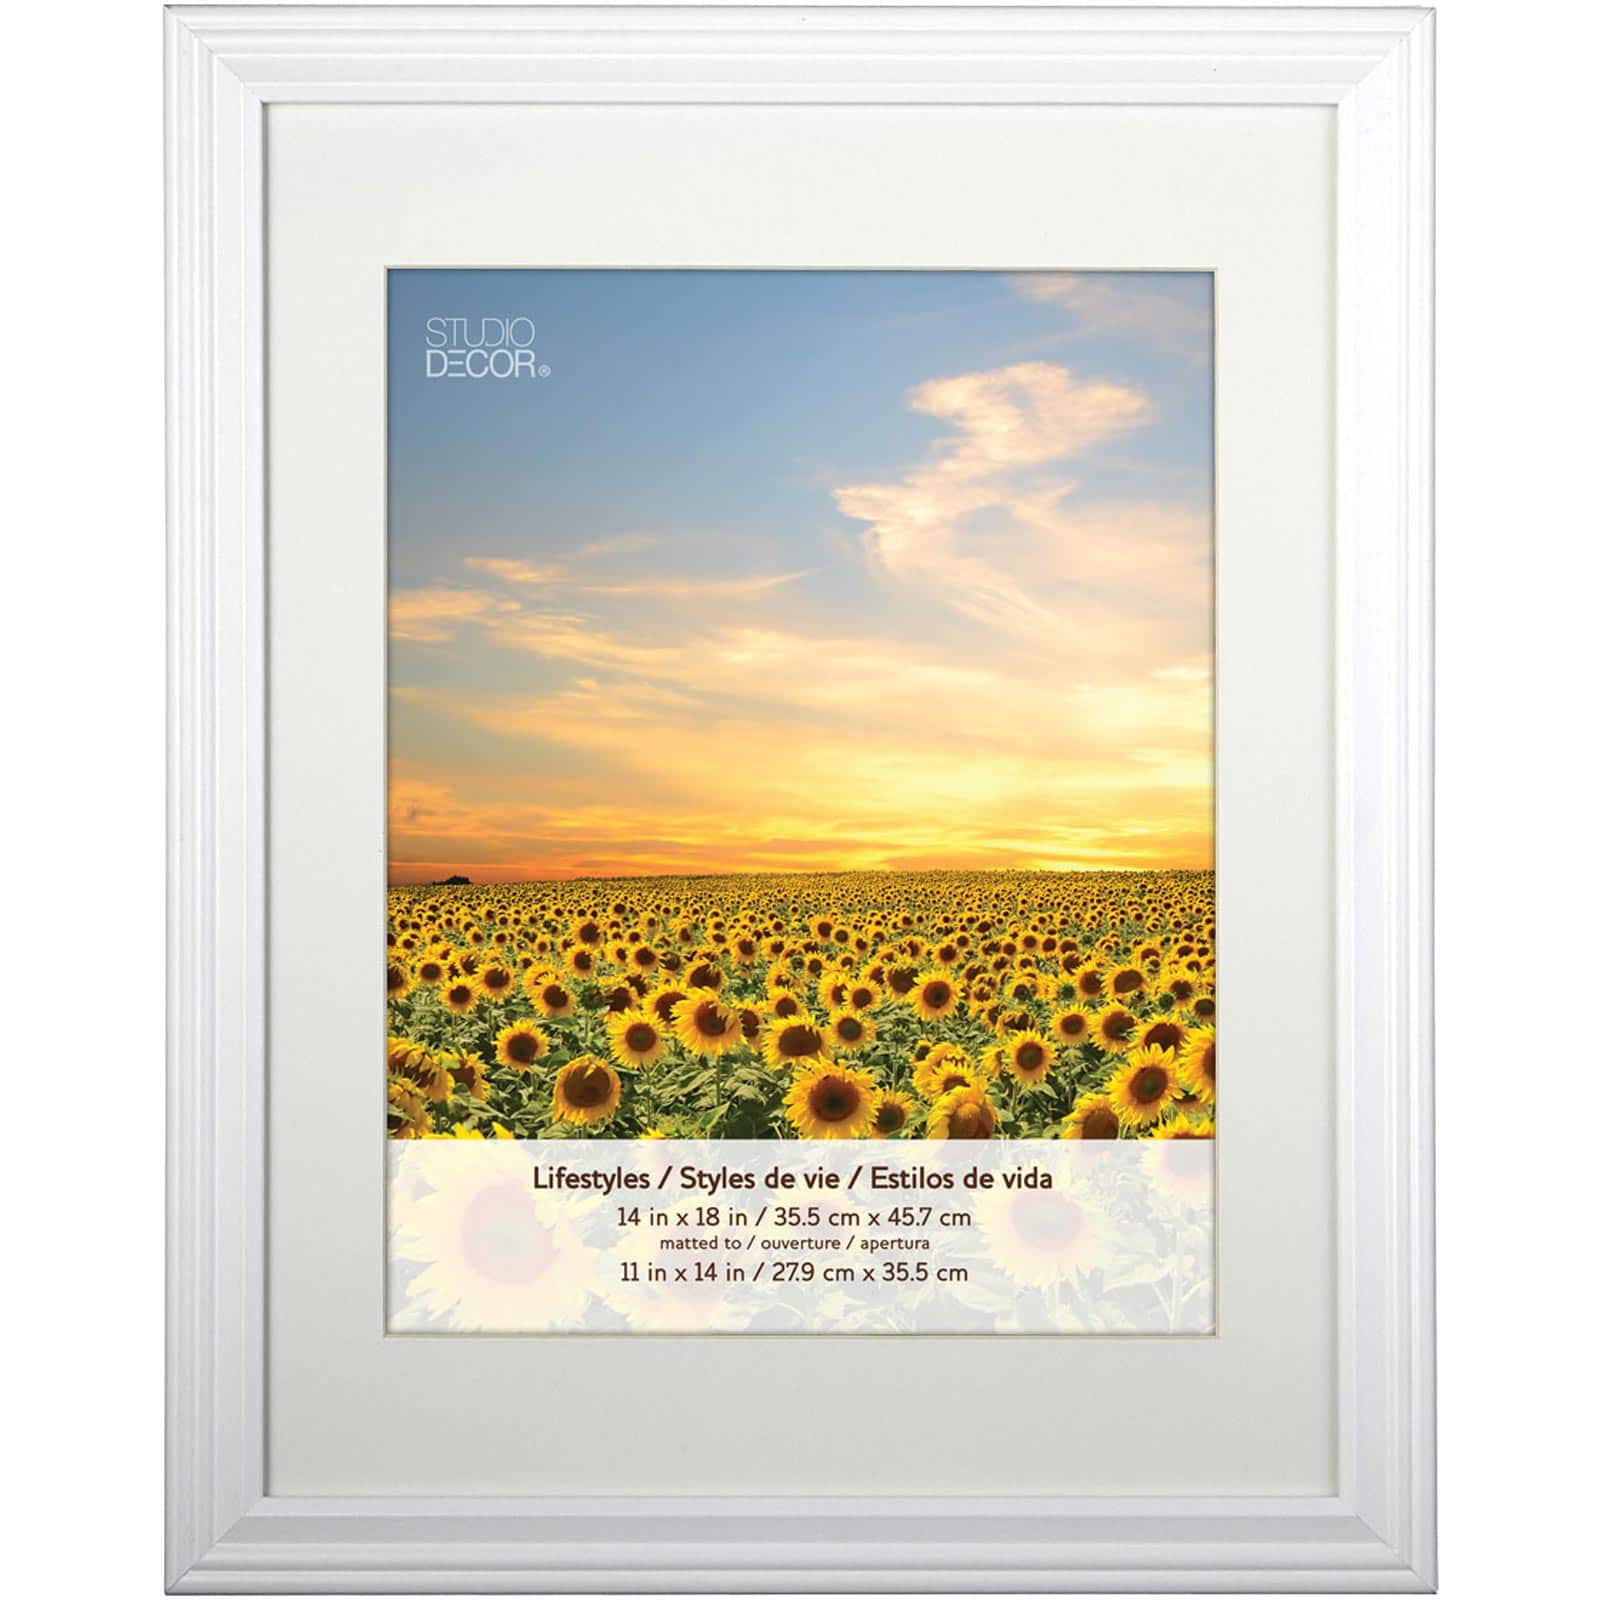 White Frame with Mat, lifestyles by Studio Decor | 5 x 7 | Michaels